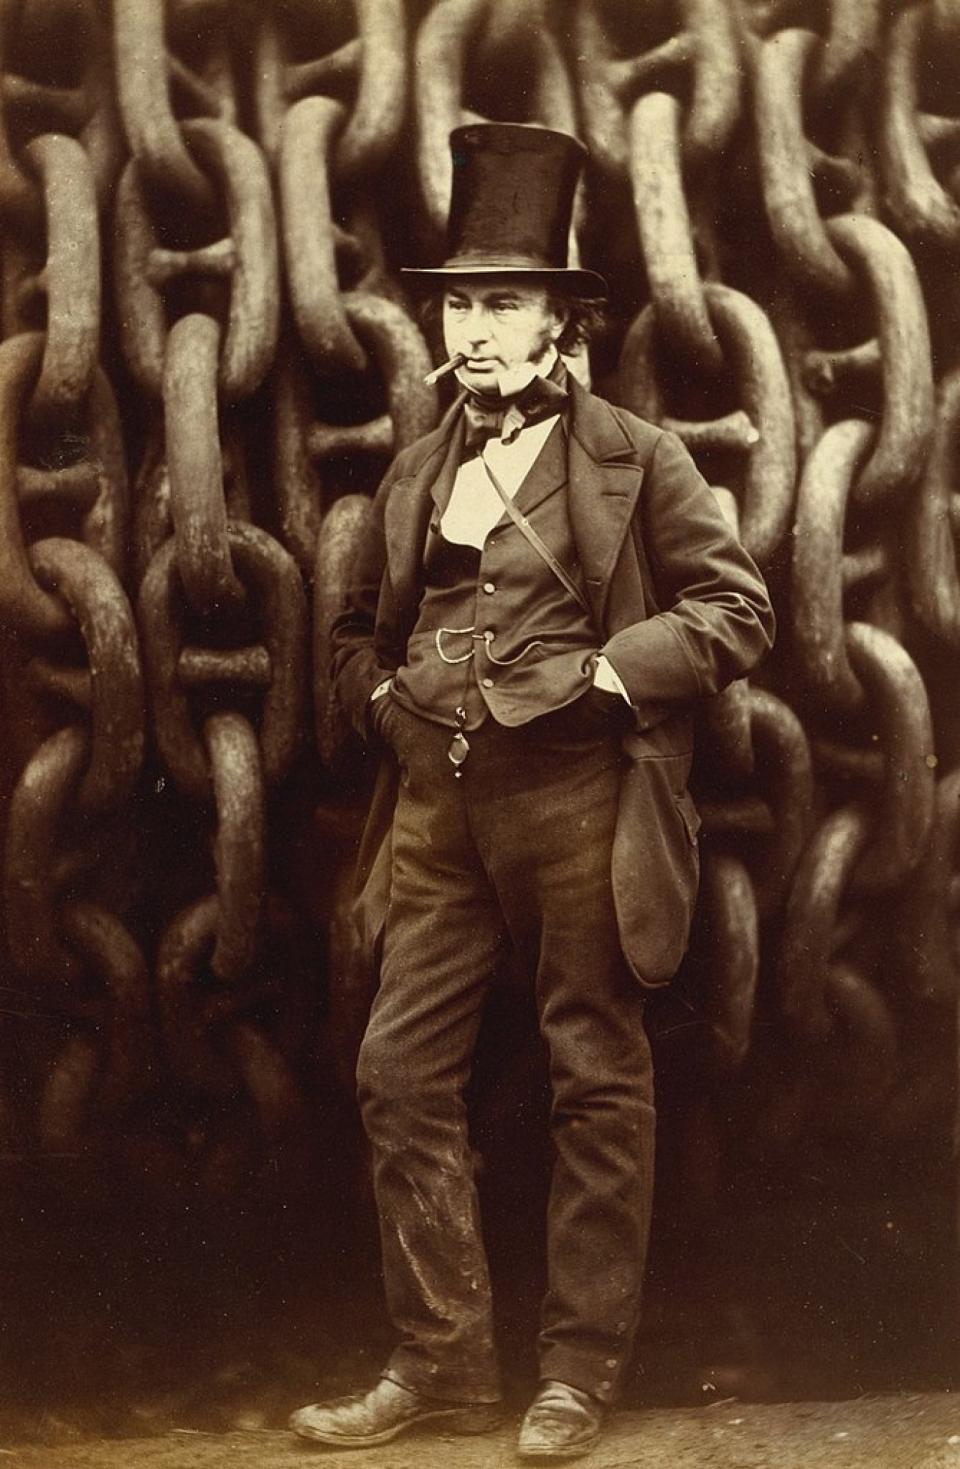 Isambard Kingdom Brunel was and is one of the most celebrated engineers ever